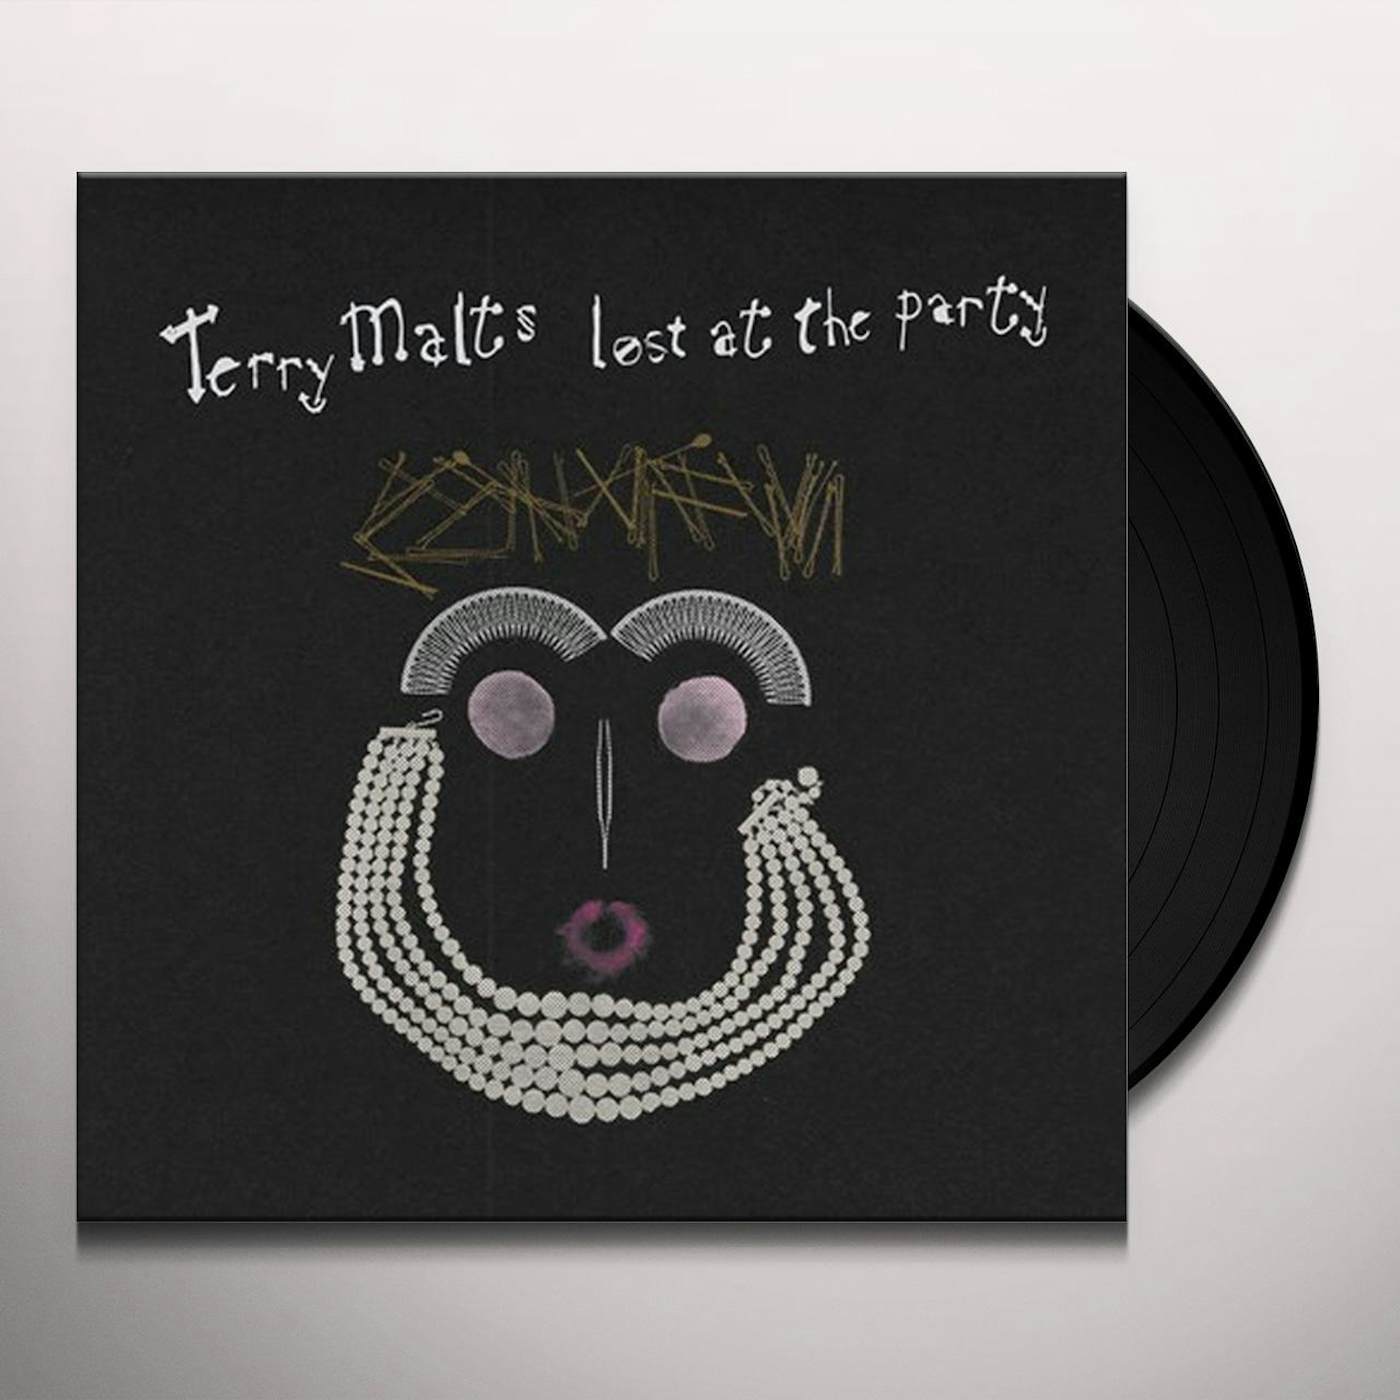 Terry Malts Lost at the Party Vinyl Record